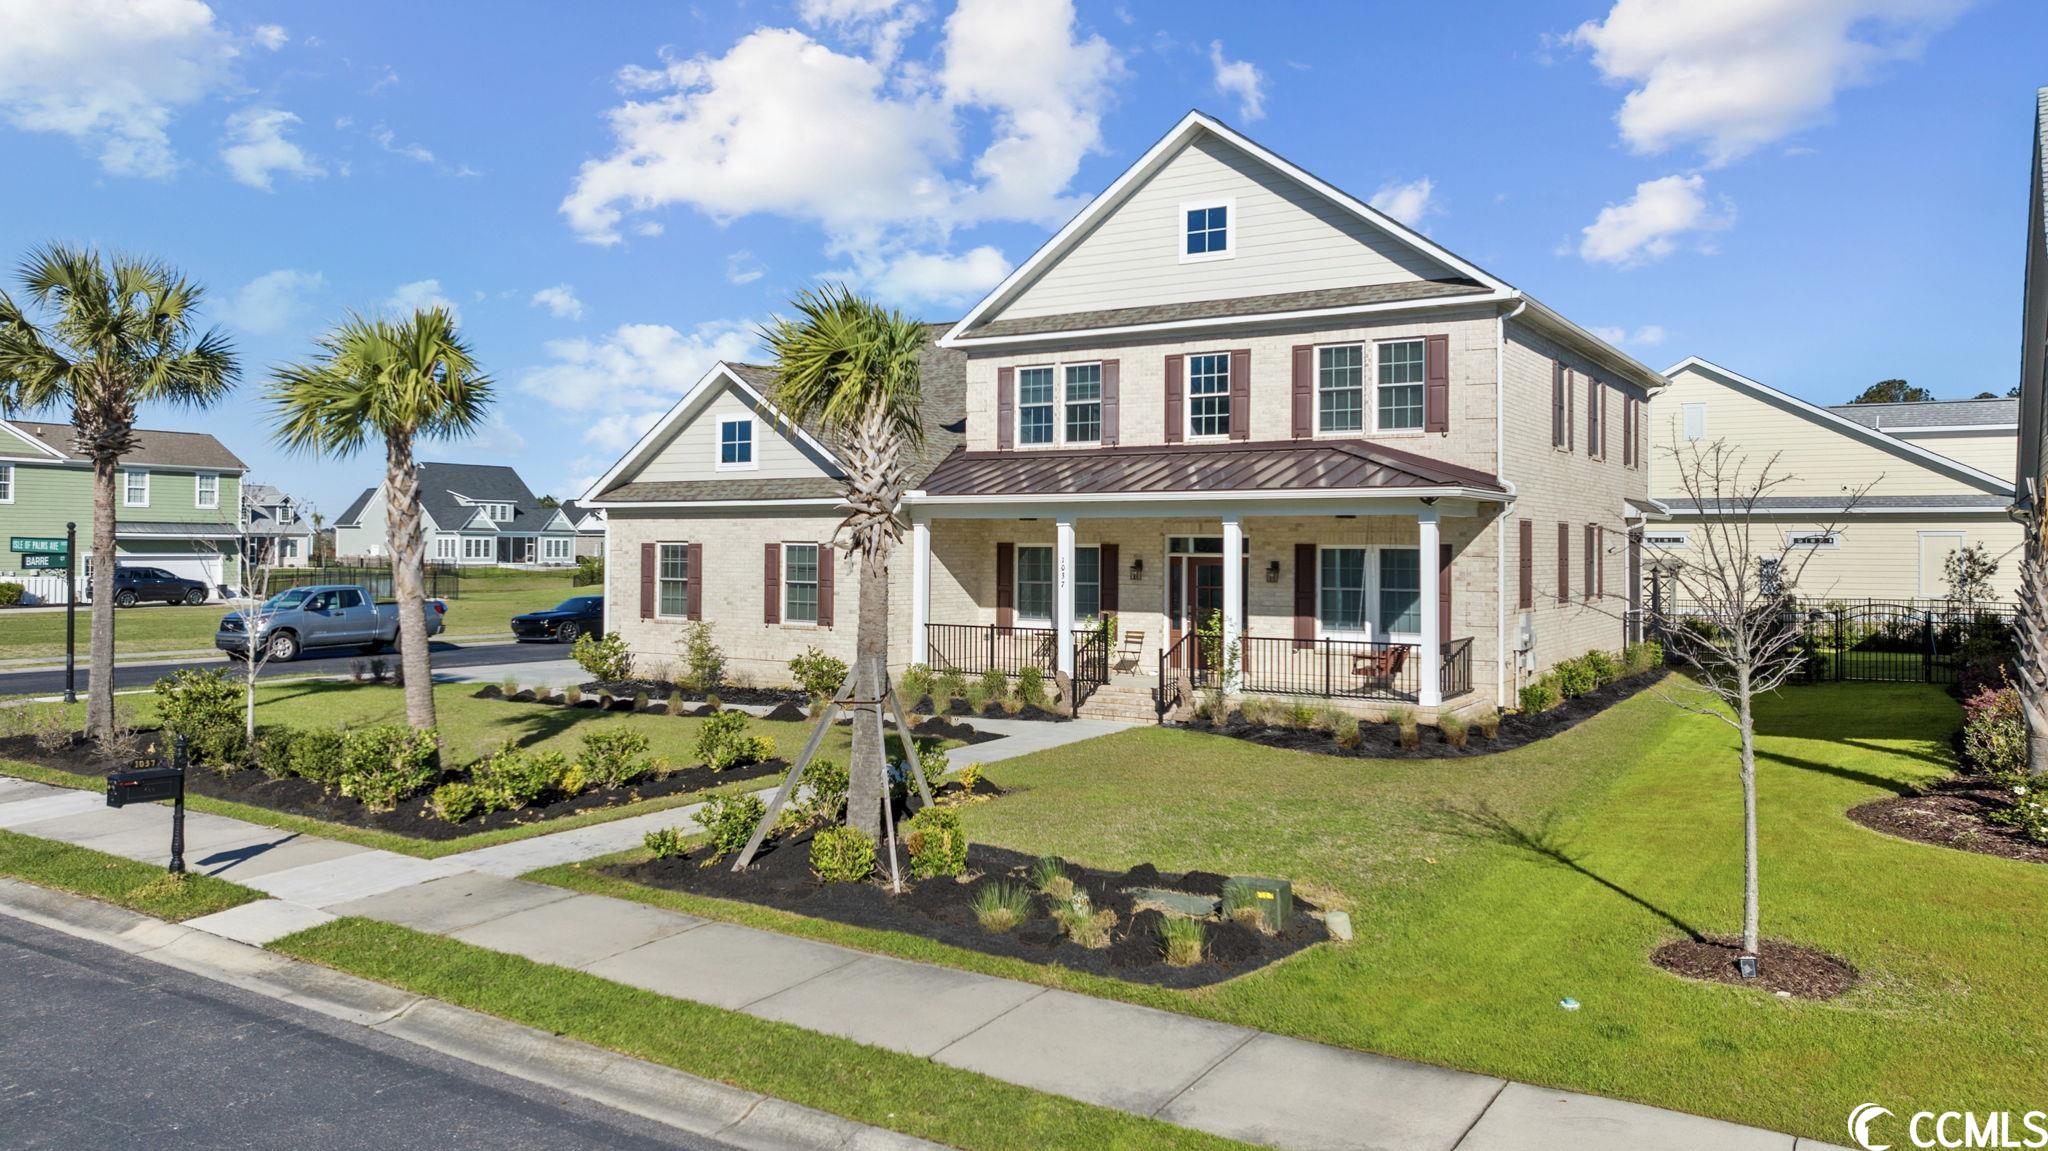 1037 East Isle of Palms Ave. Myrtle Beach, SC 29579